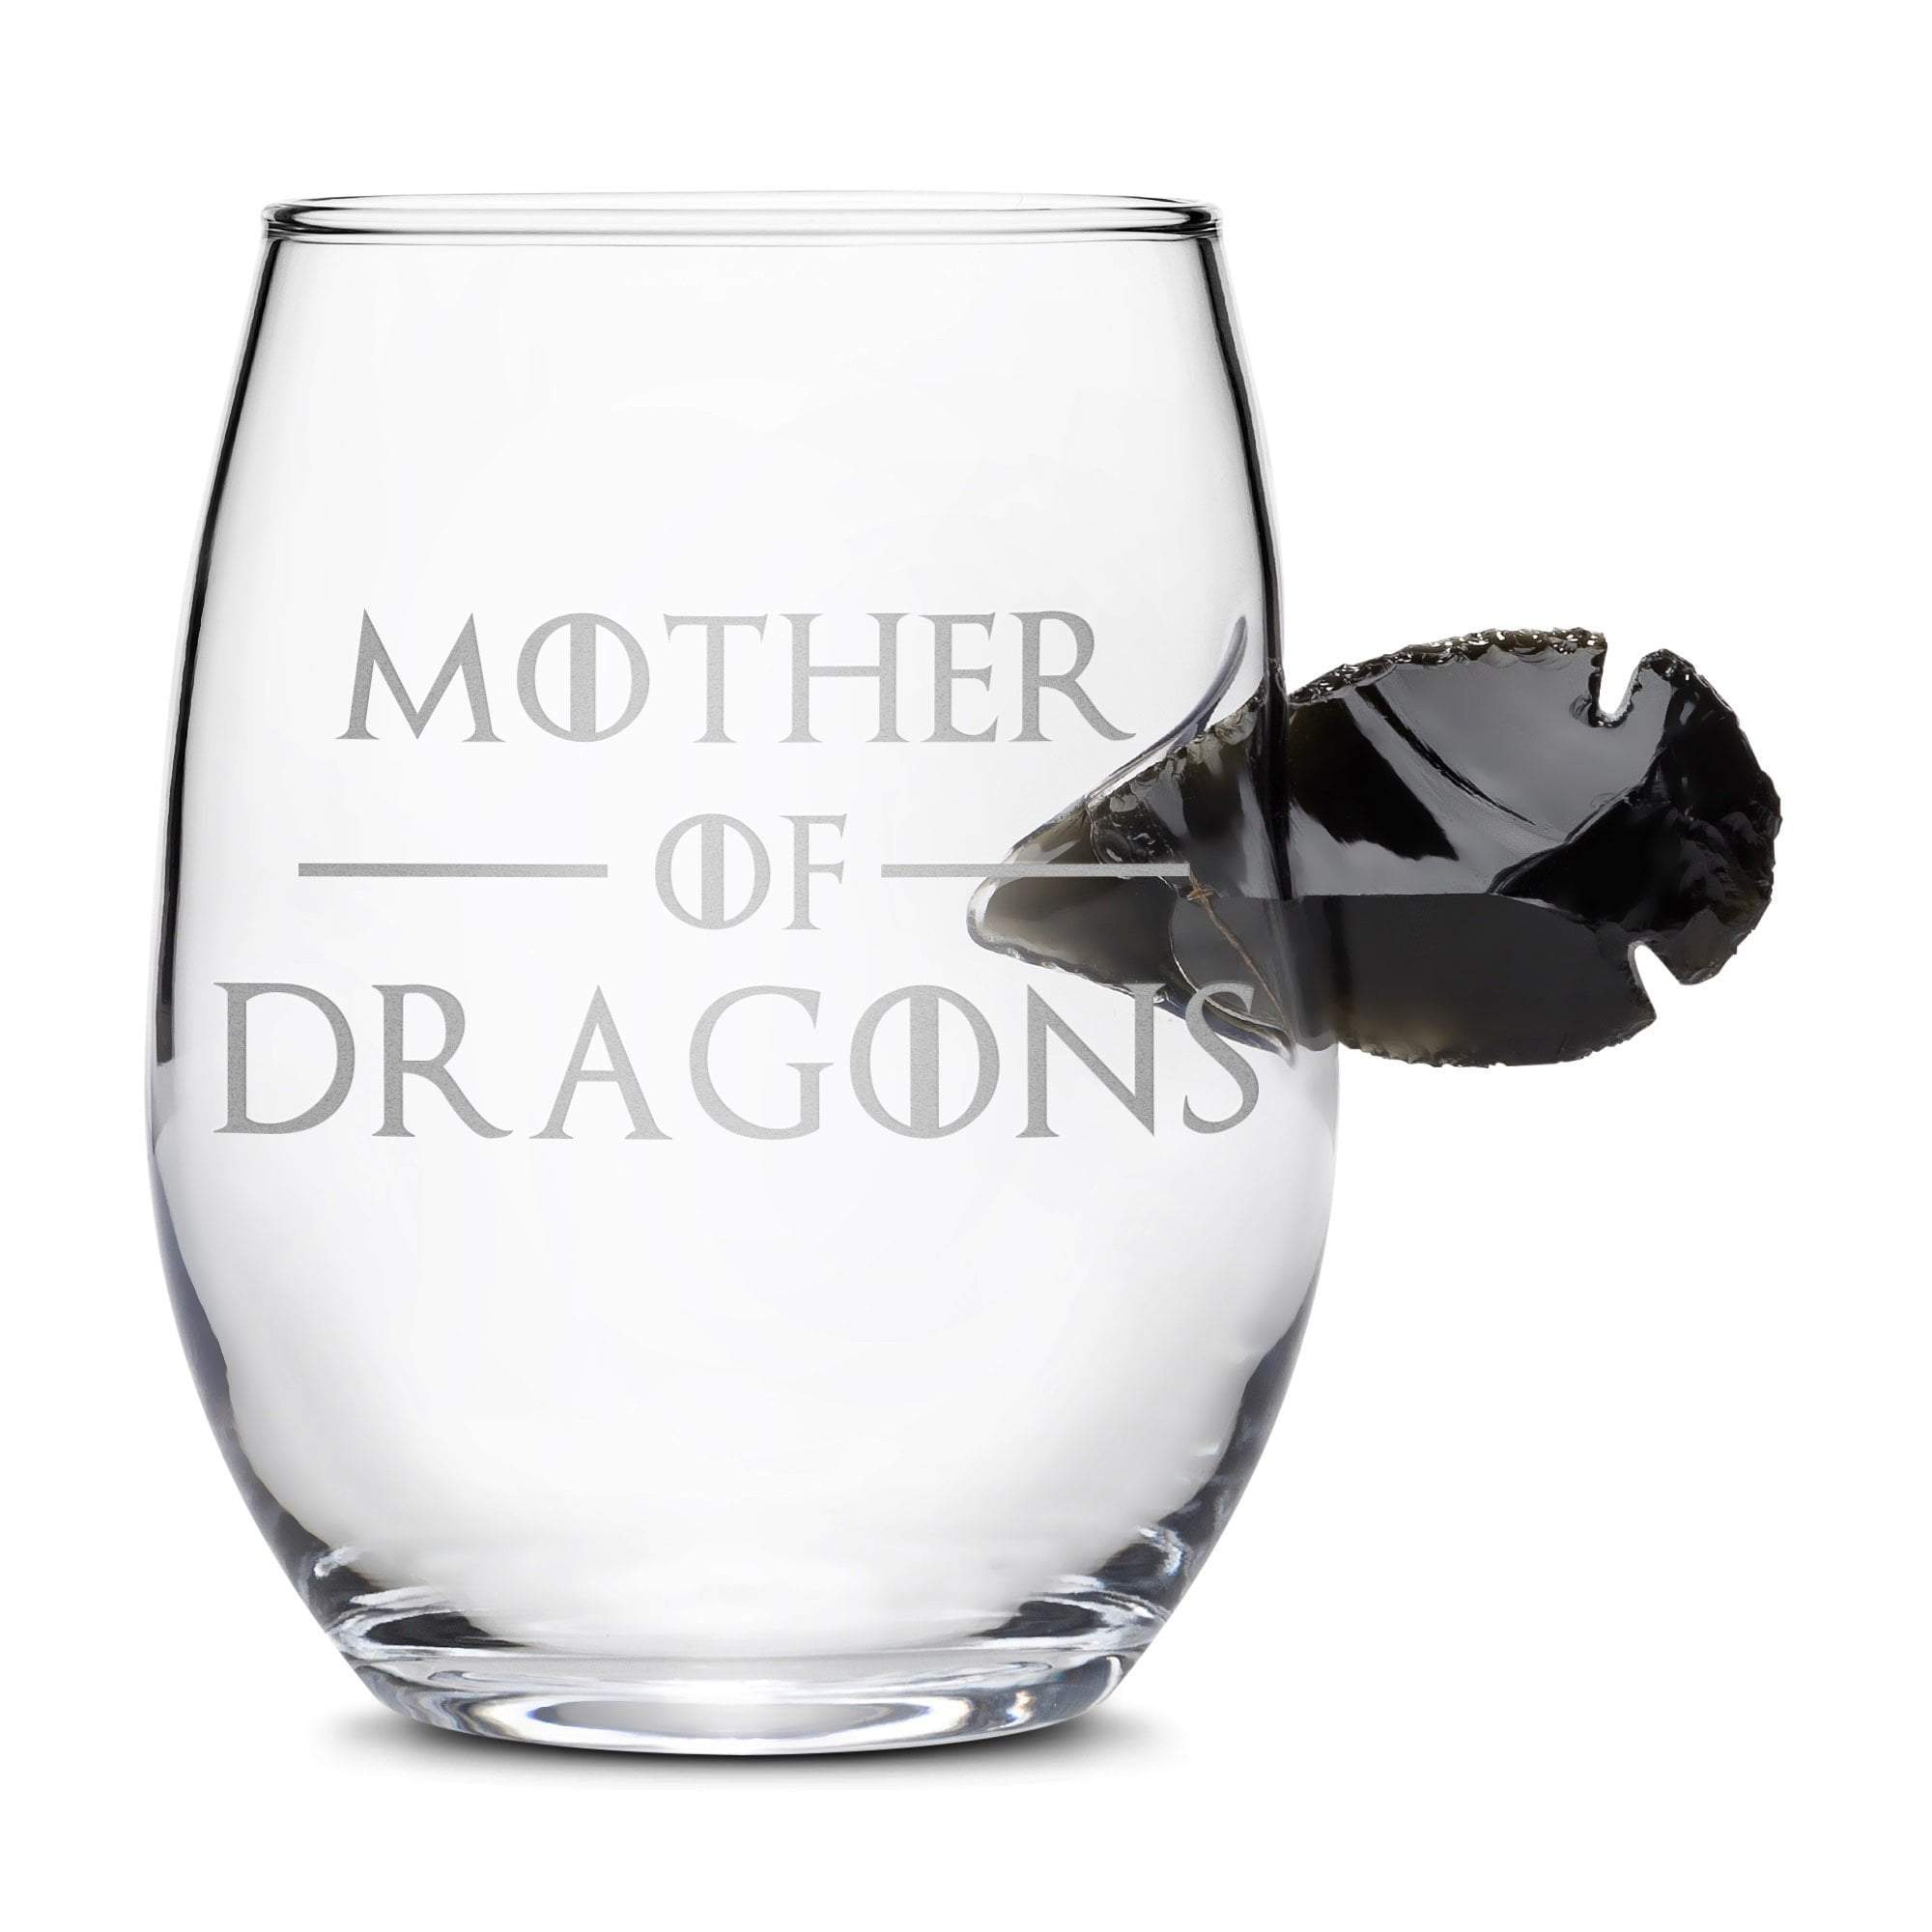 Limited Edition Game of Thrones Wine Dragon Glass Obsidian Arrowhead, Mother of Dragons Integrity Bottles